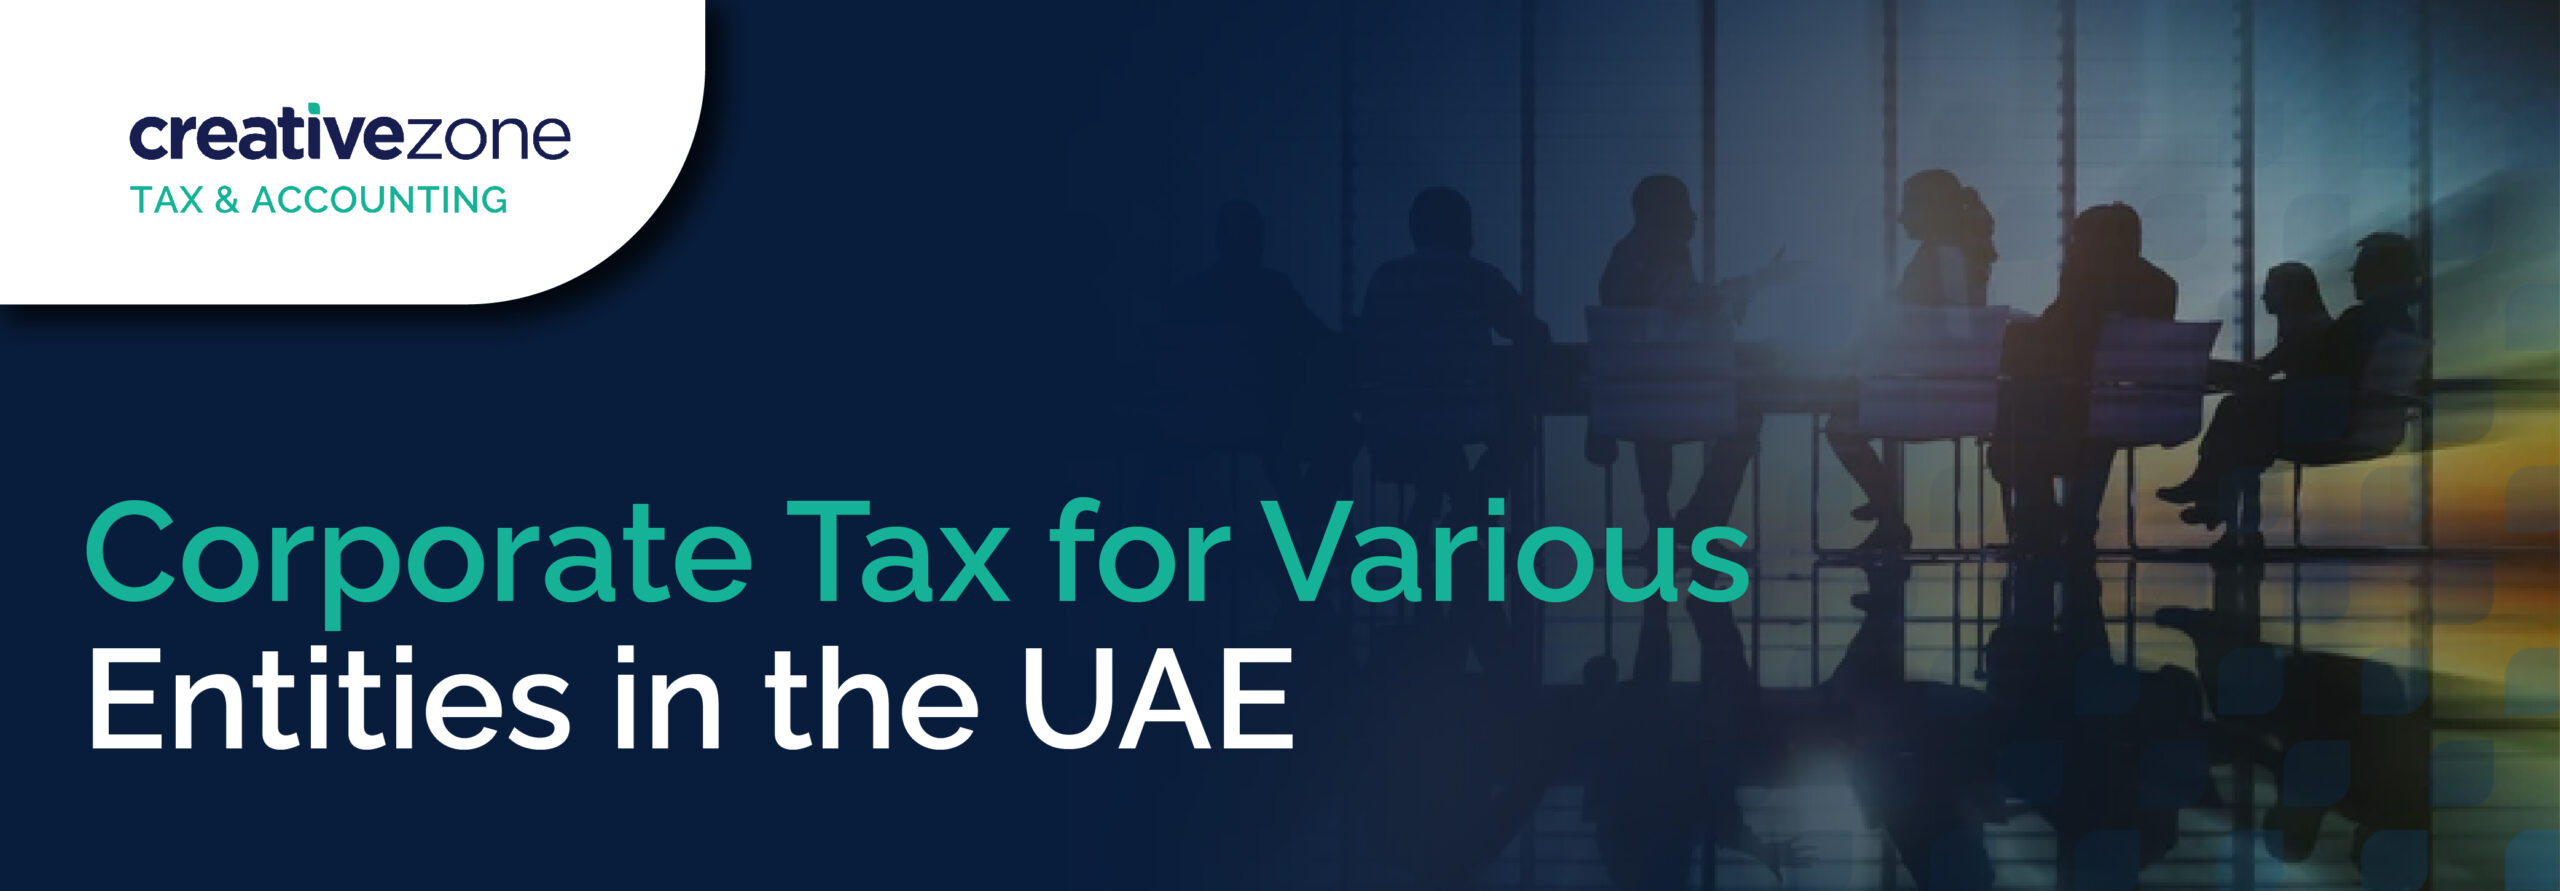 Corporate Tax for Various Entities in the UAE